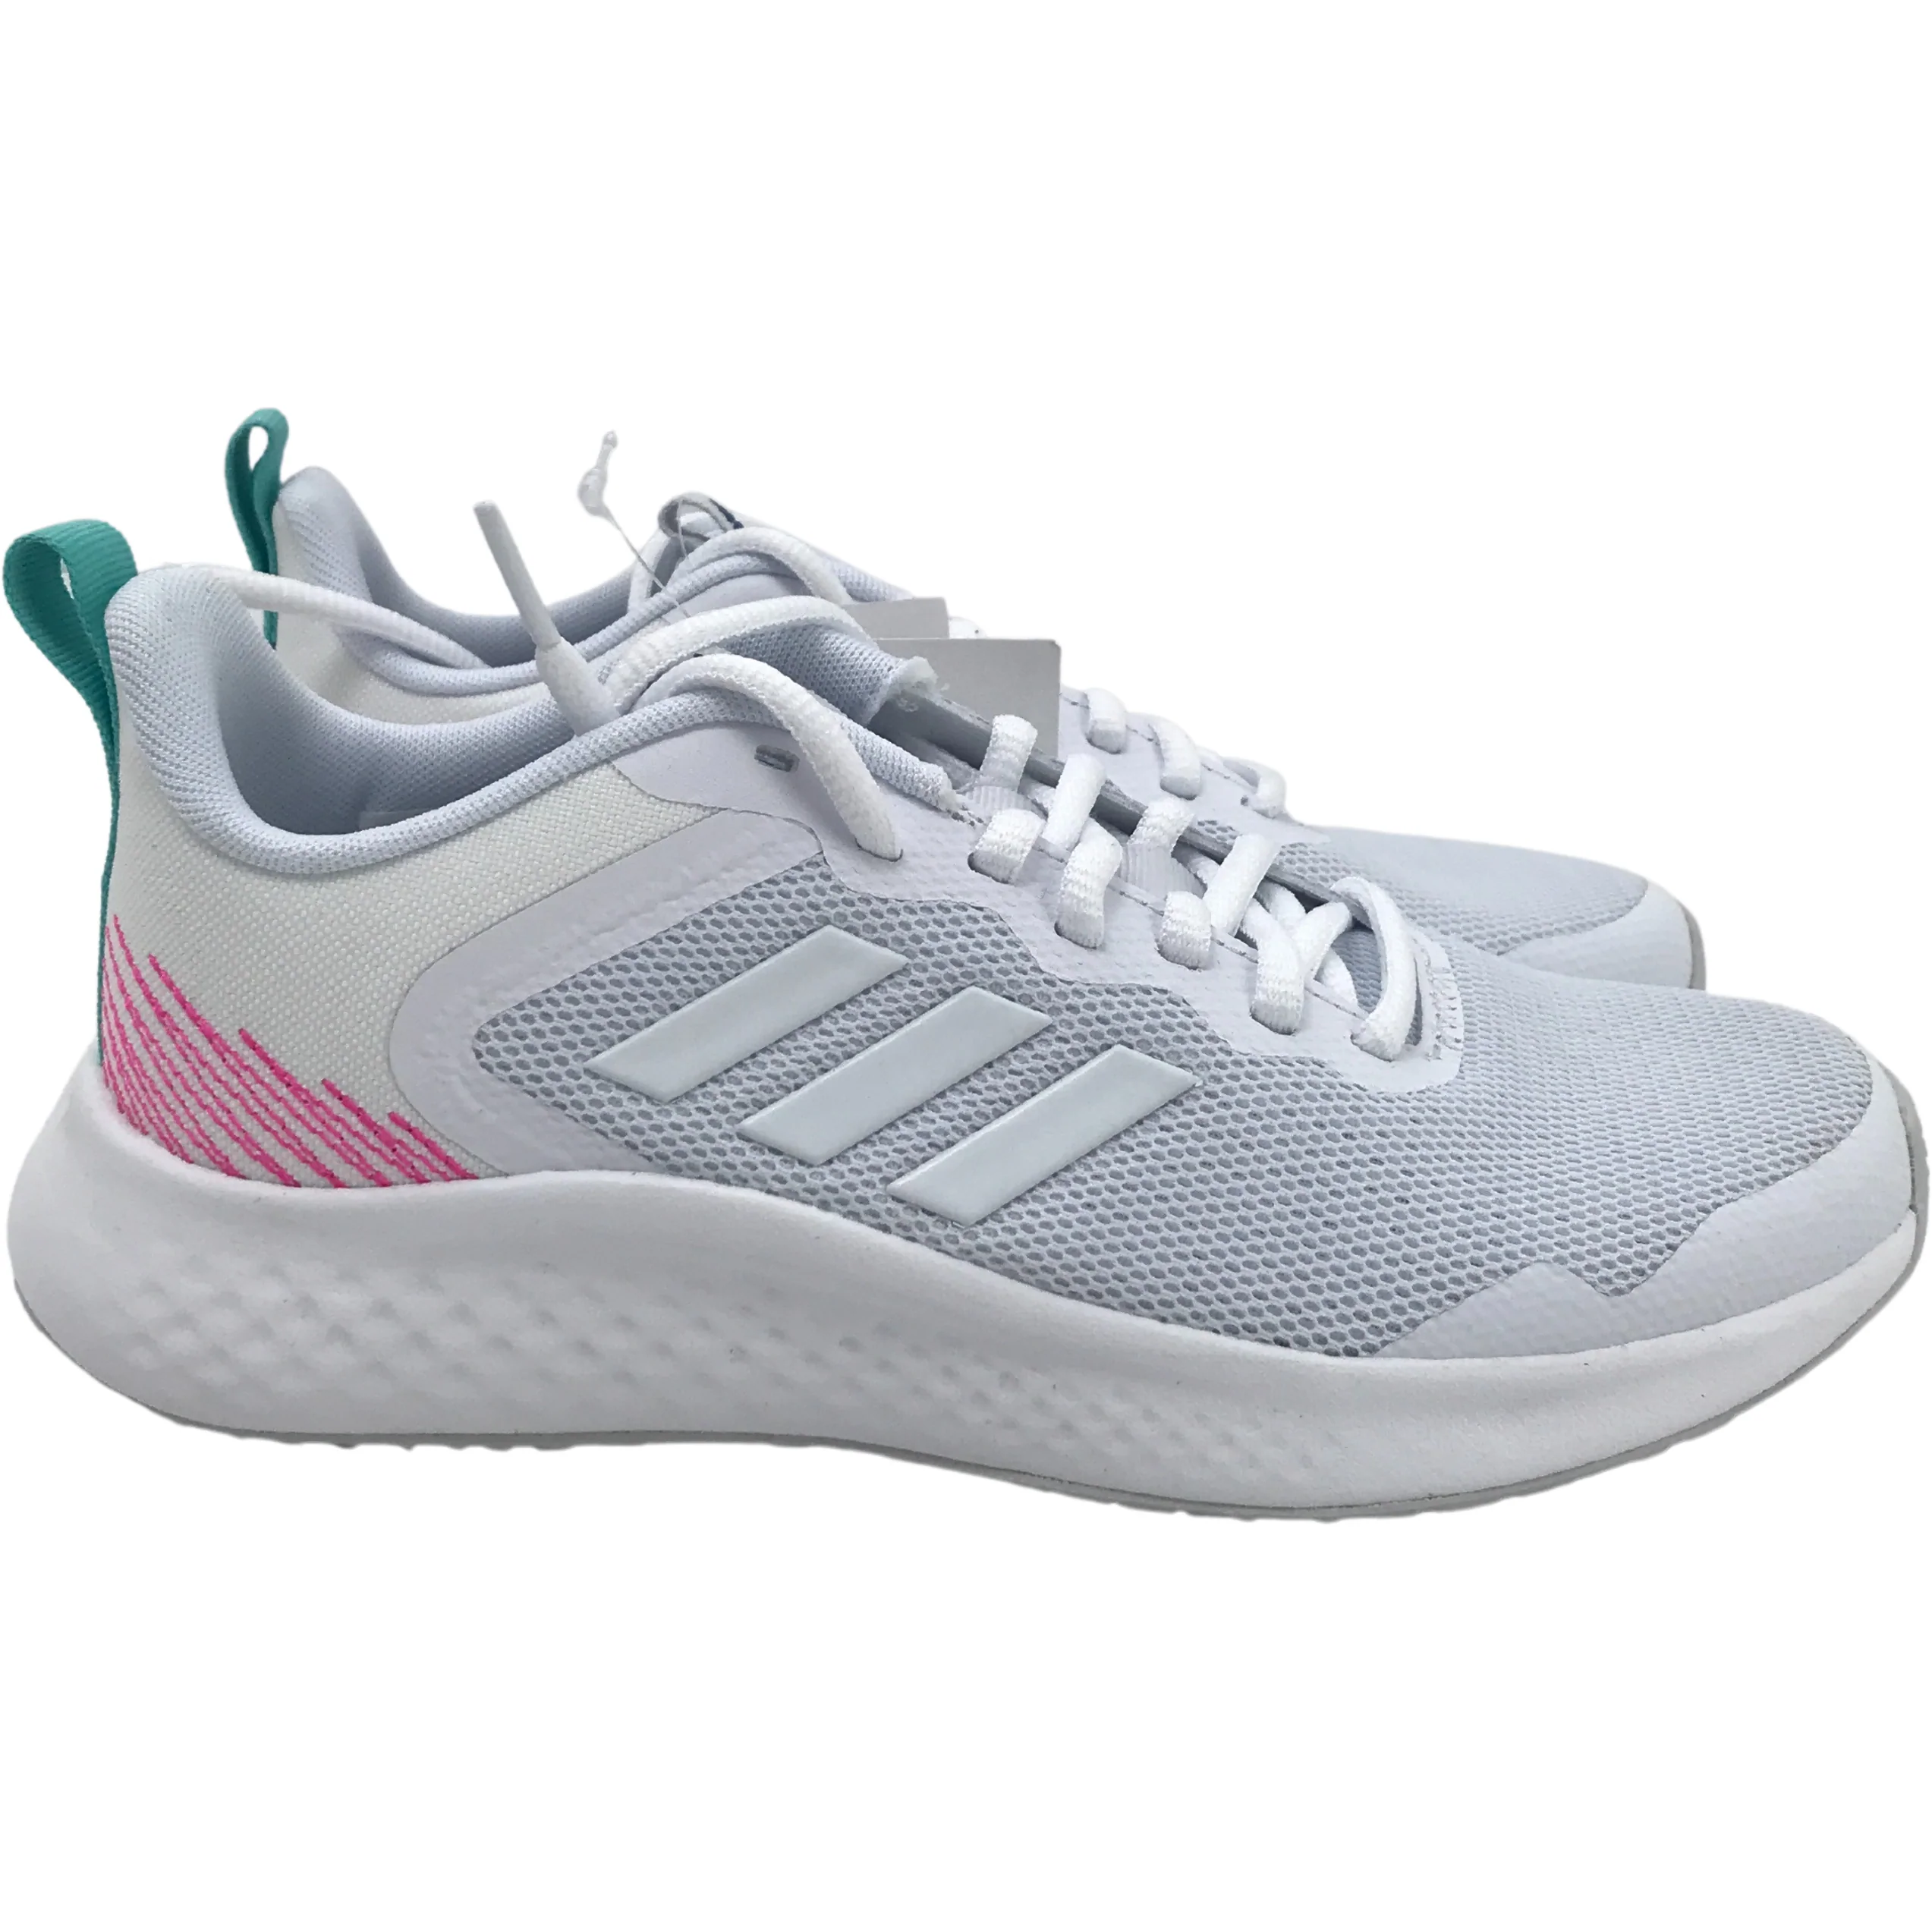 Adidas Women's Running Shoes: FluidStreet / White with Pink and Green / Various Sizes